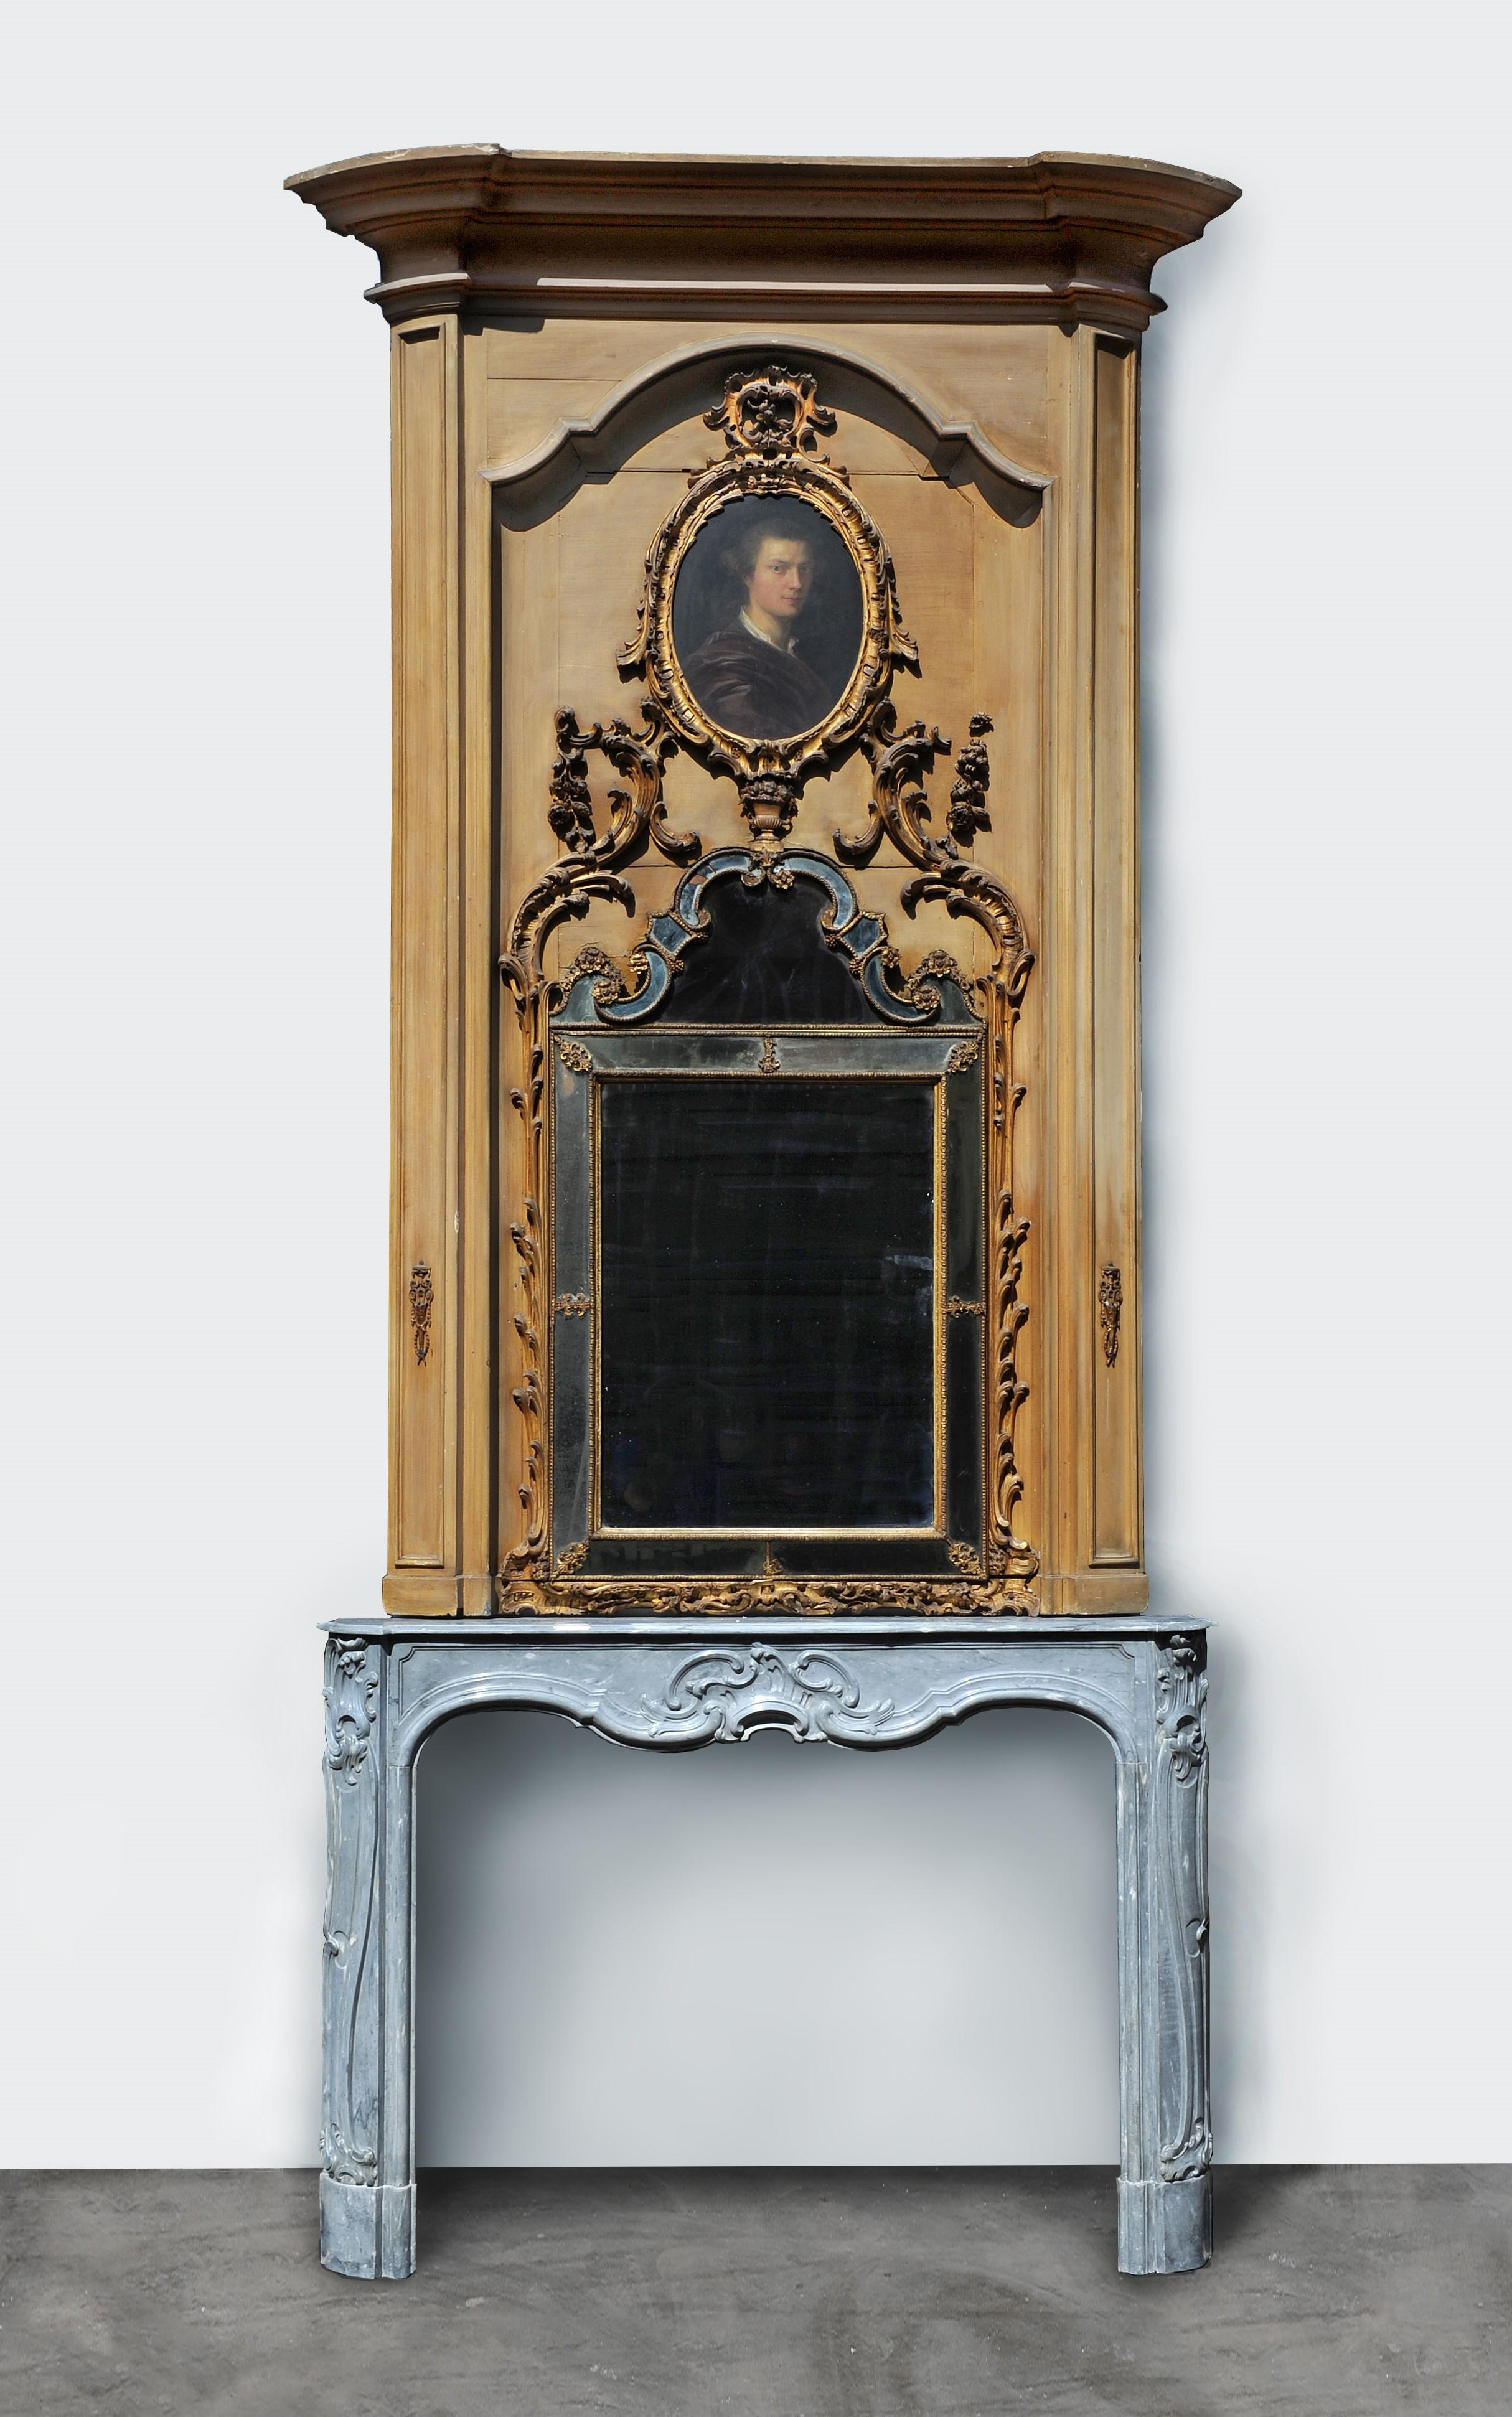 We are very pleased to offer this exceptional and original combination of a beautiful grey marble fireplace with its original trumeau in the Rococo manner.

This 18th Century mantel is created from the nicest Italian grey Bardiglio marble with